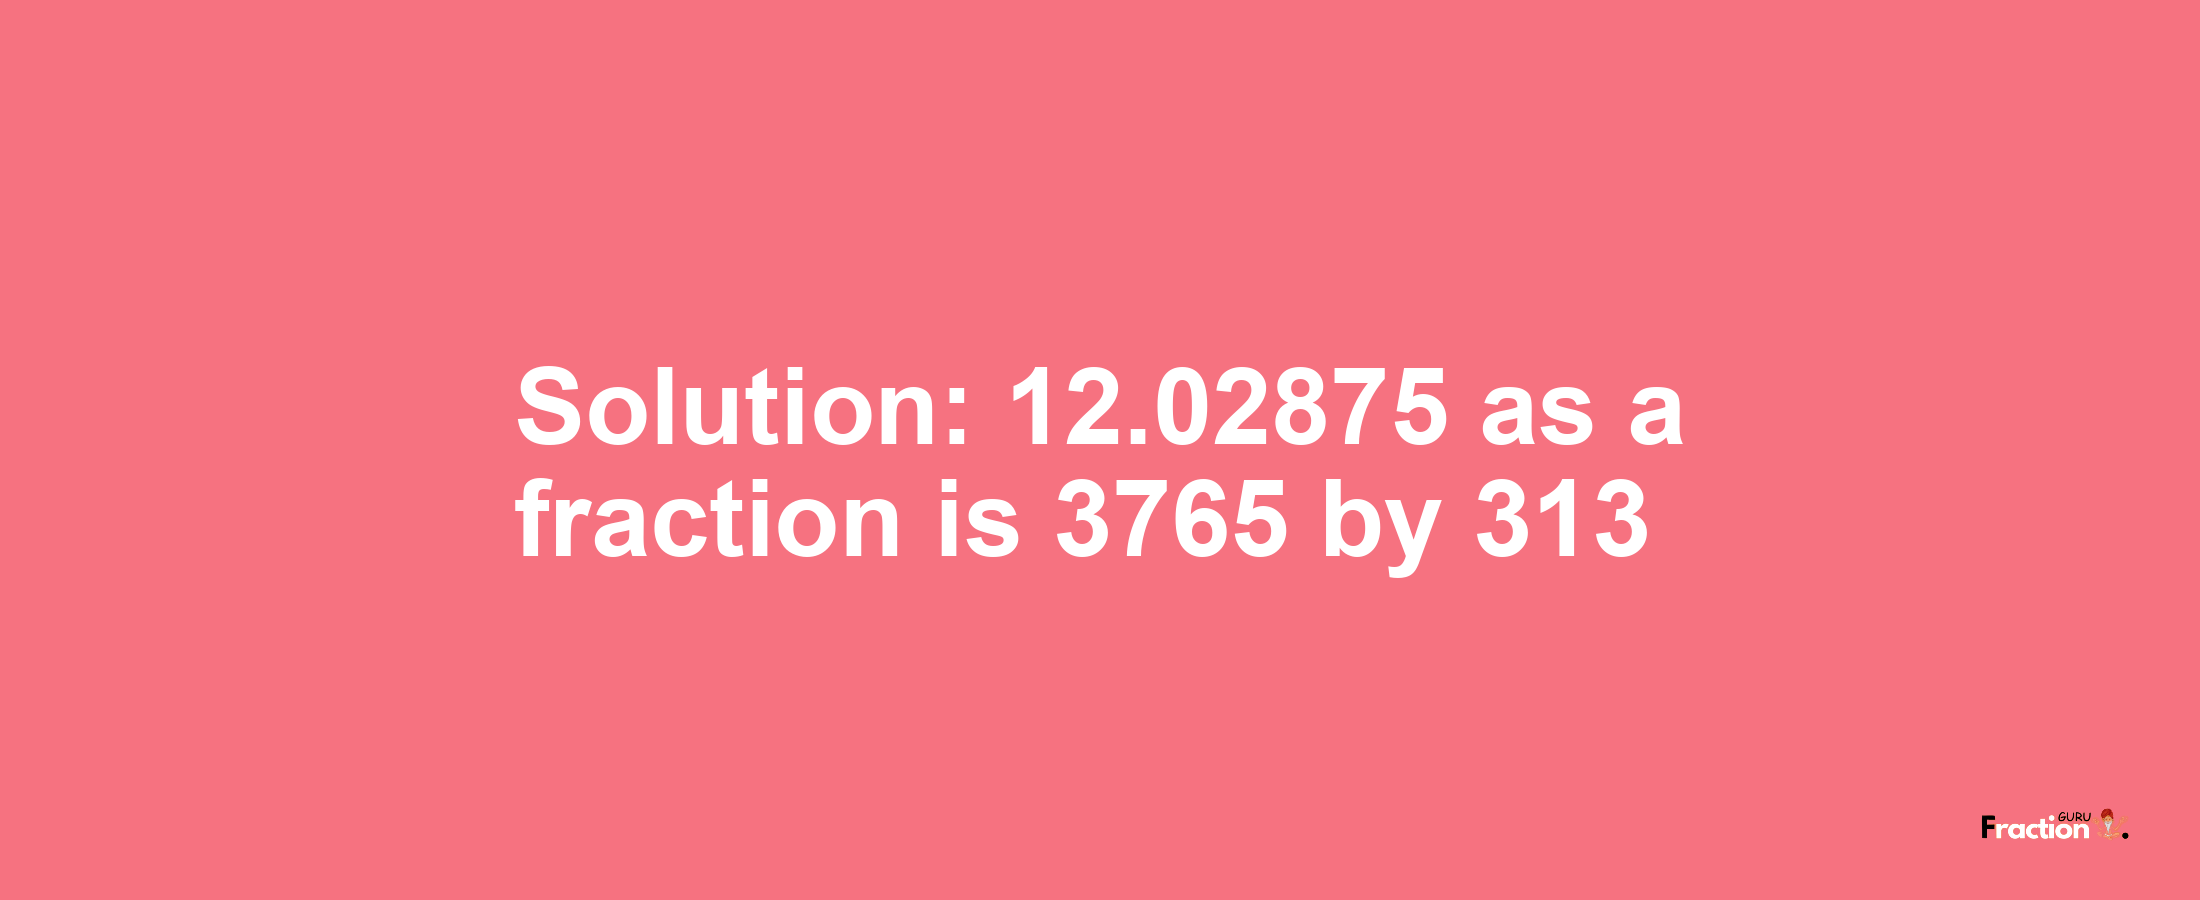 Solution:12.02875 as a fraction is 3765/313